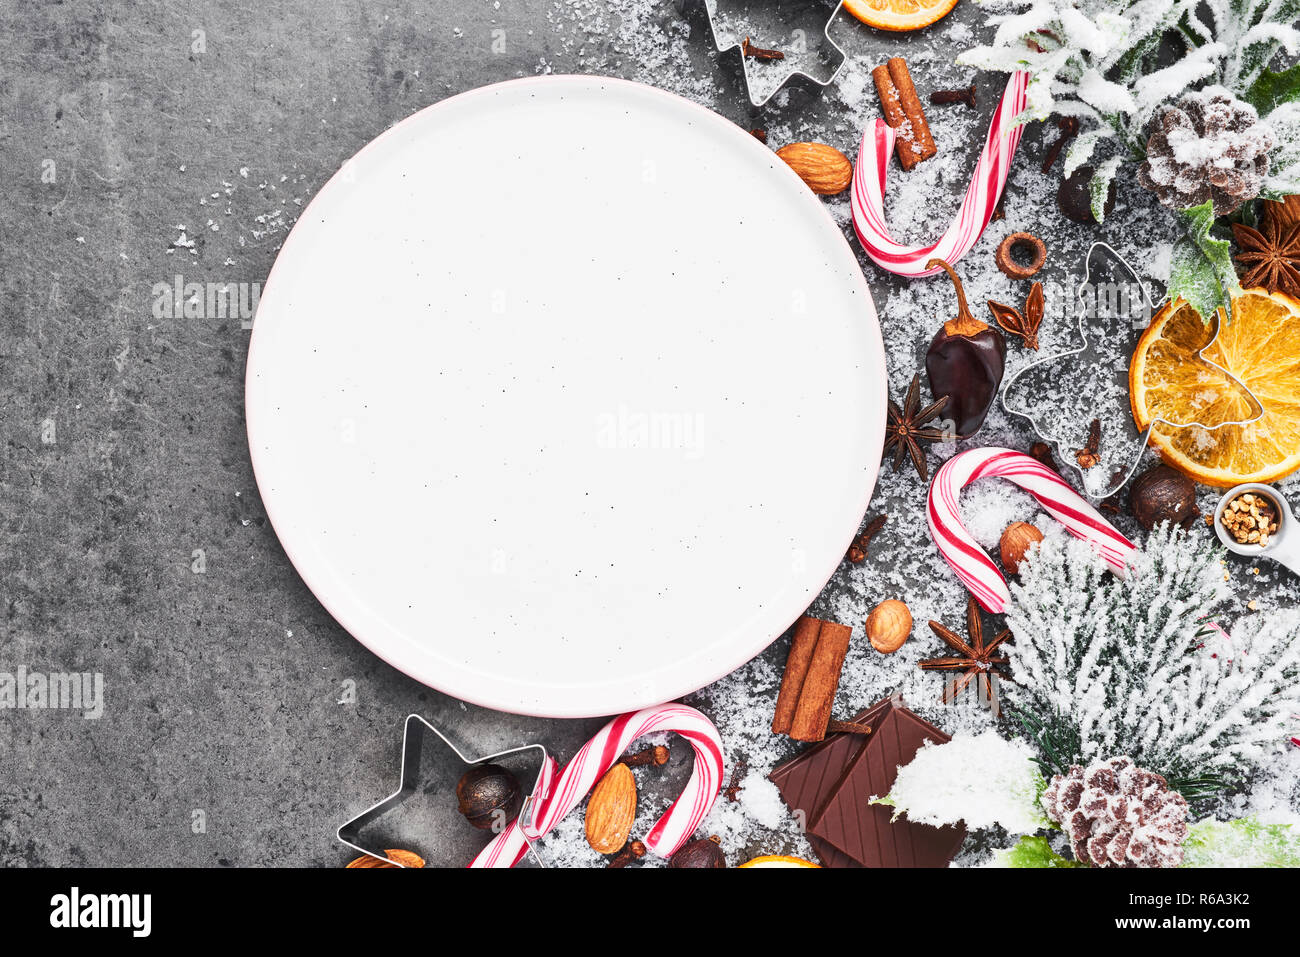 Holiday baking background with empty plate for Christmas cookies surrounded by cookie cutters and spices on grey concrete table. Holiday or Christmas  Stock Photo